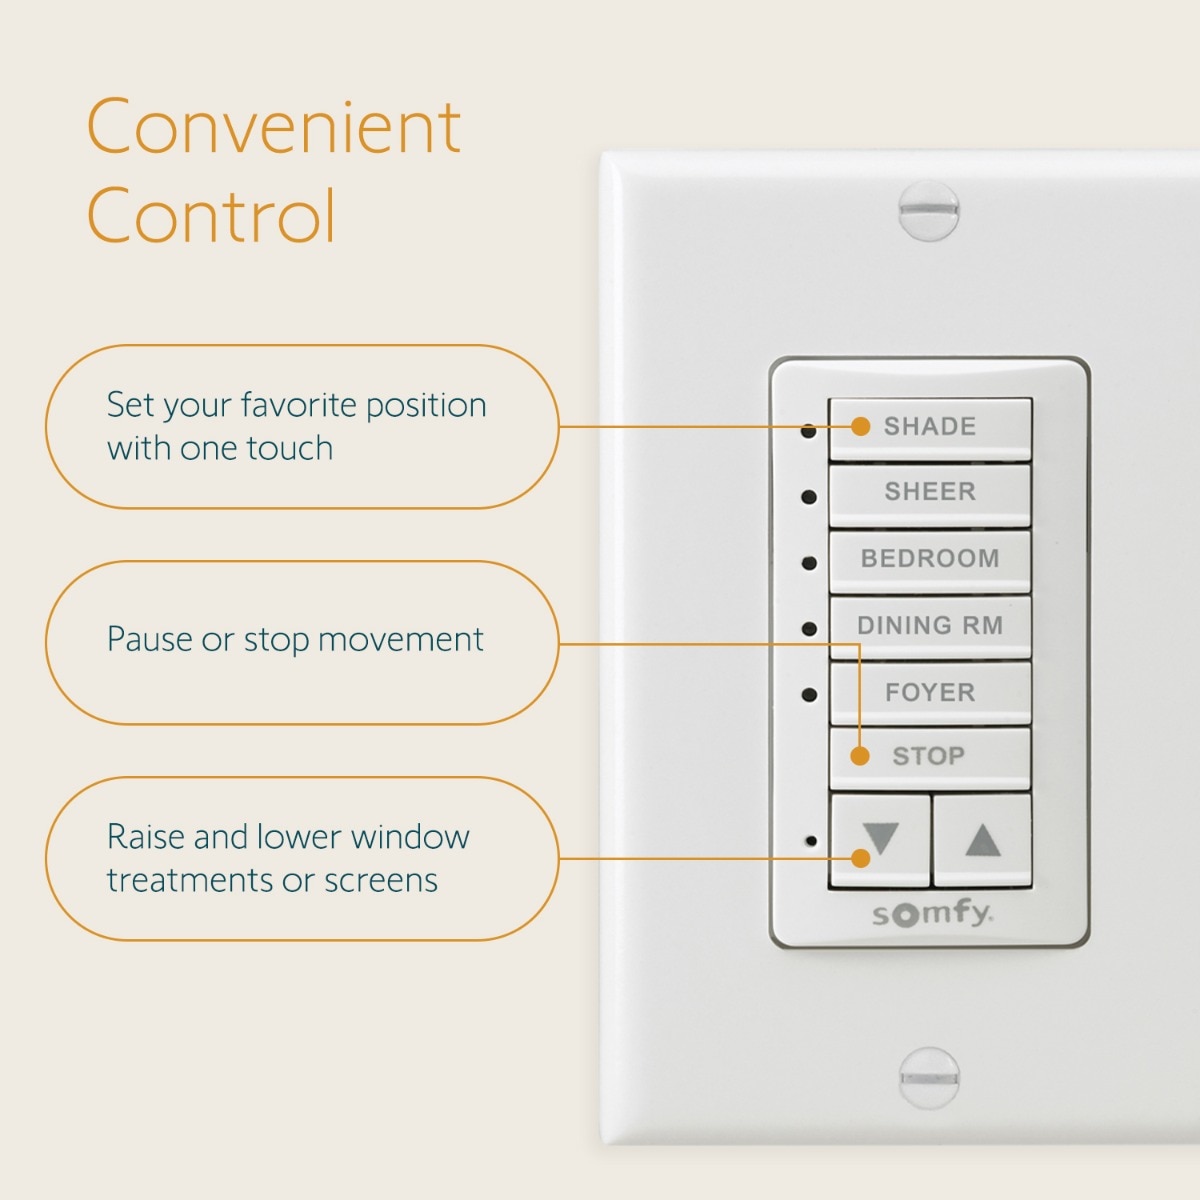 Télécommande SOMFY WALL SWITCH 3CH RTS